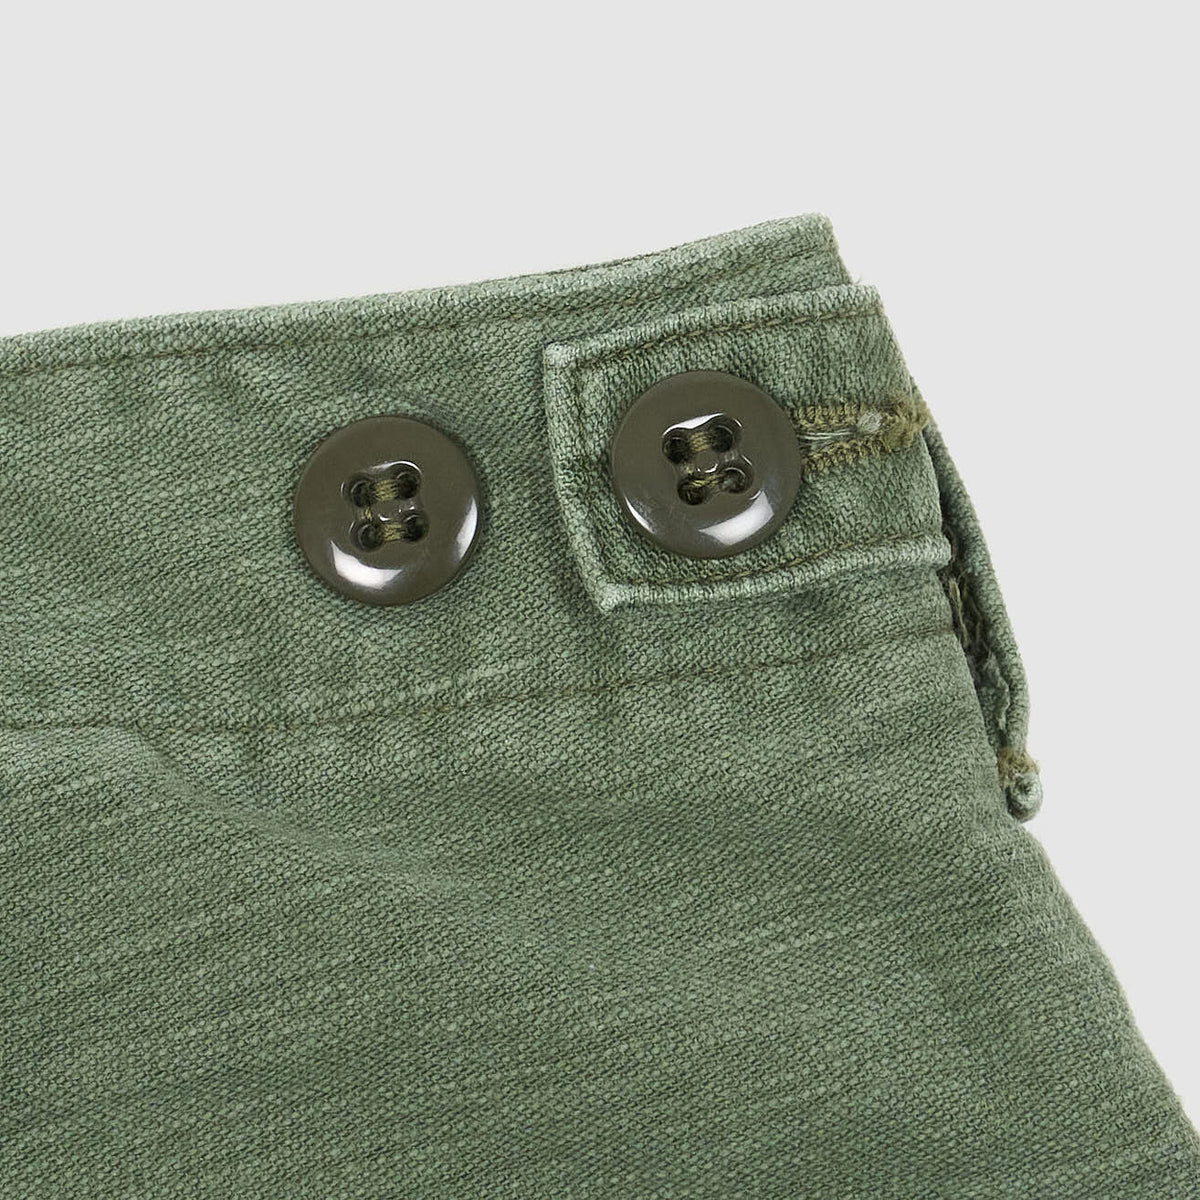 Orslow Military Fatigue Pants Vintage Washed